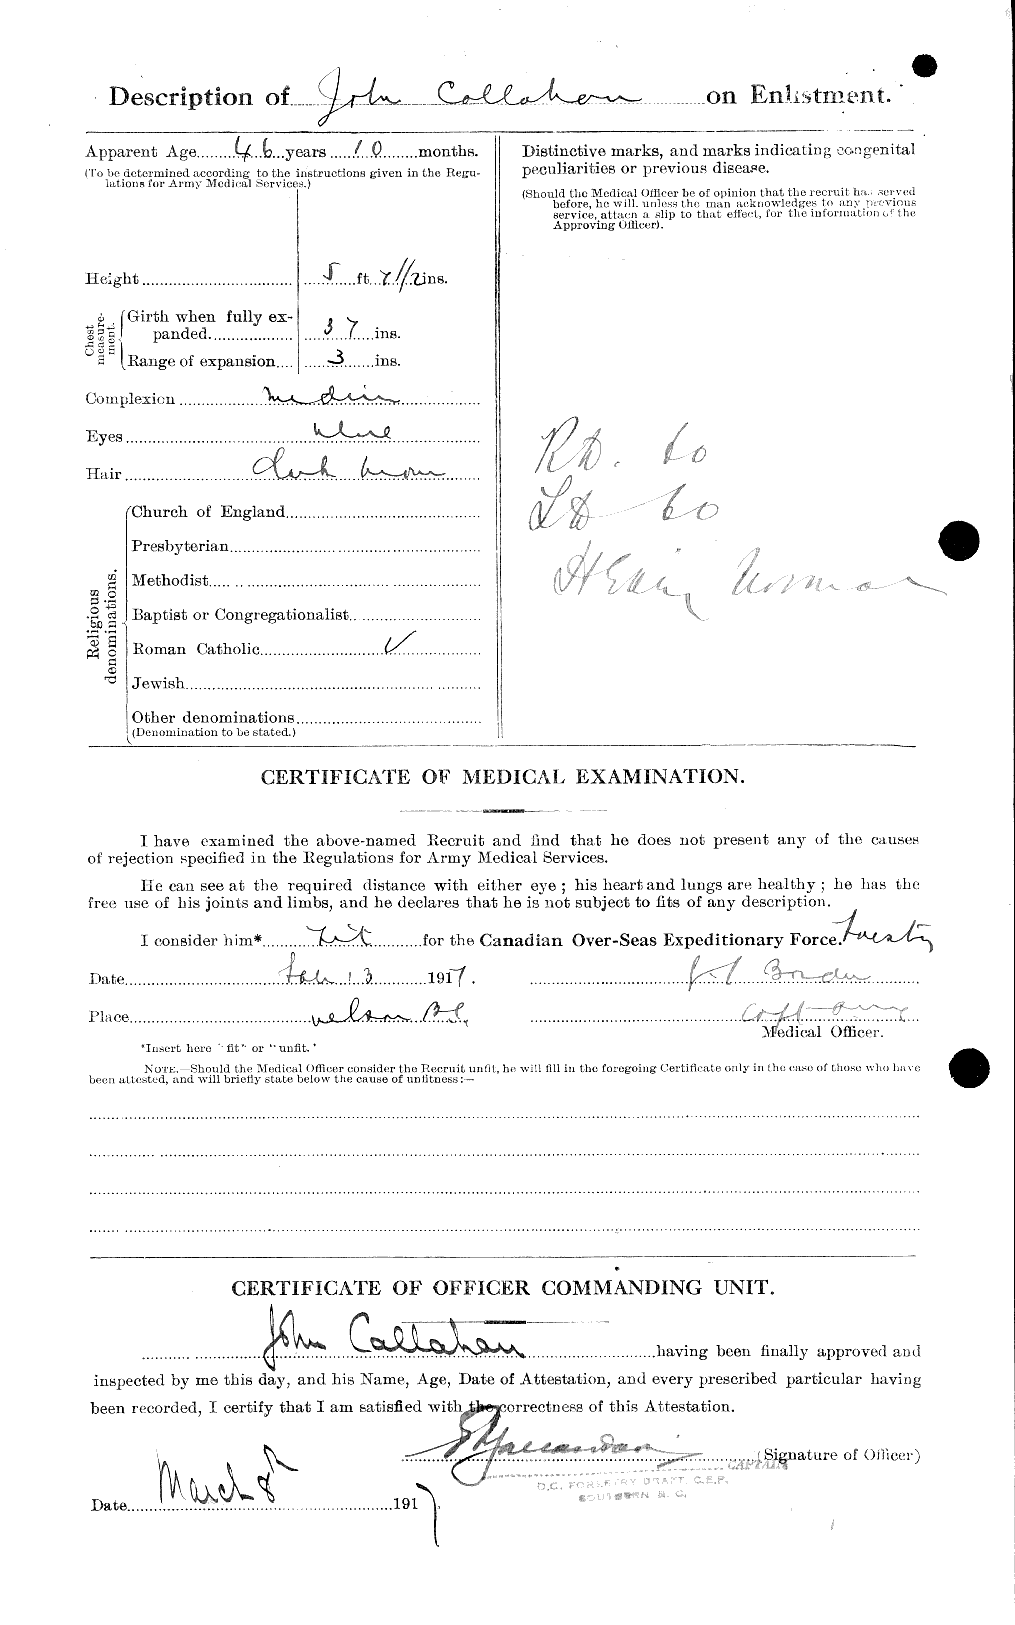 Personnel Records of the First World War - CEF 000621b